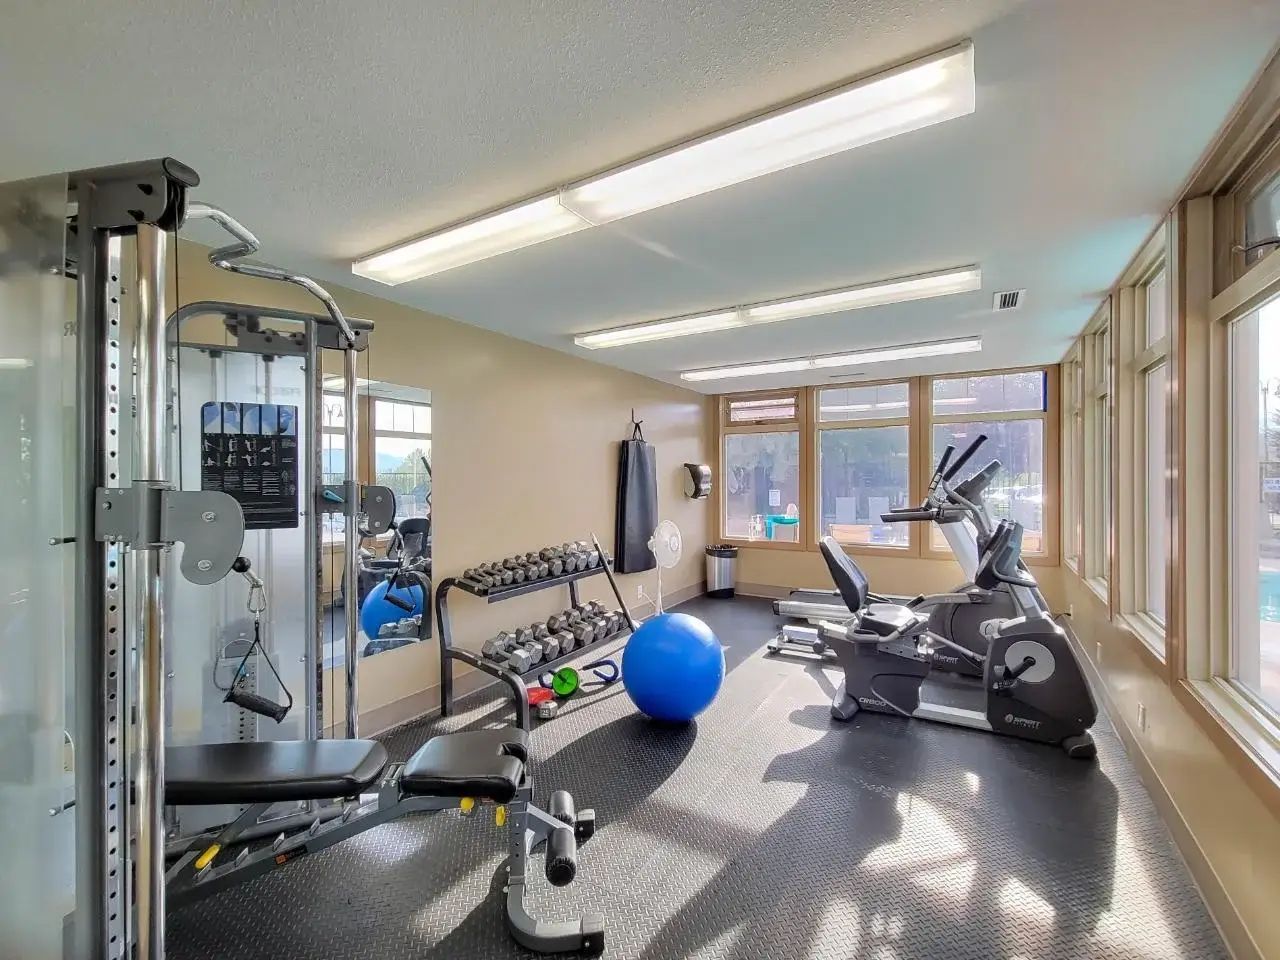 Full gym at the Trendy condo at Lake Windermere Pointe in Invermere, a BC Vacation Rental hosted by Aisling Baile Property Management.